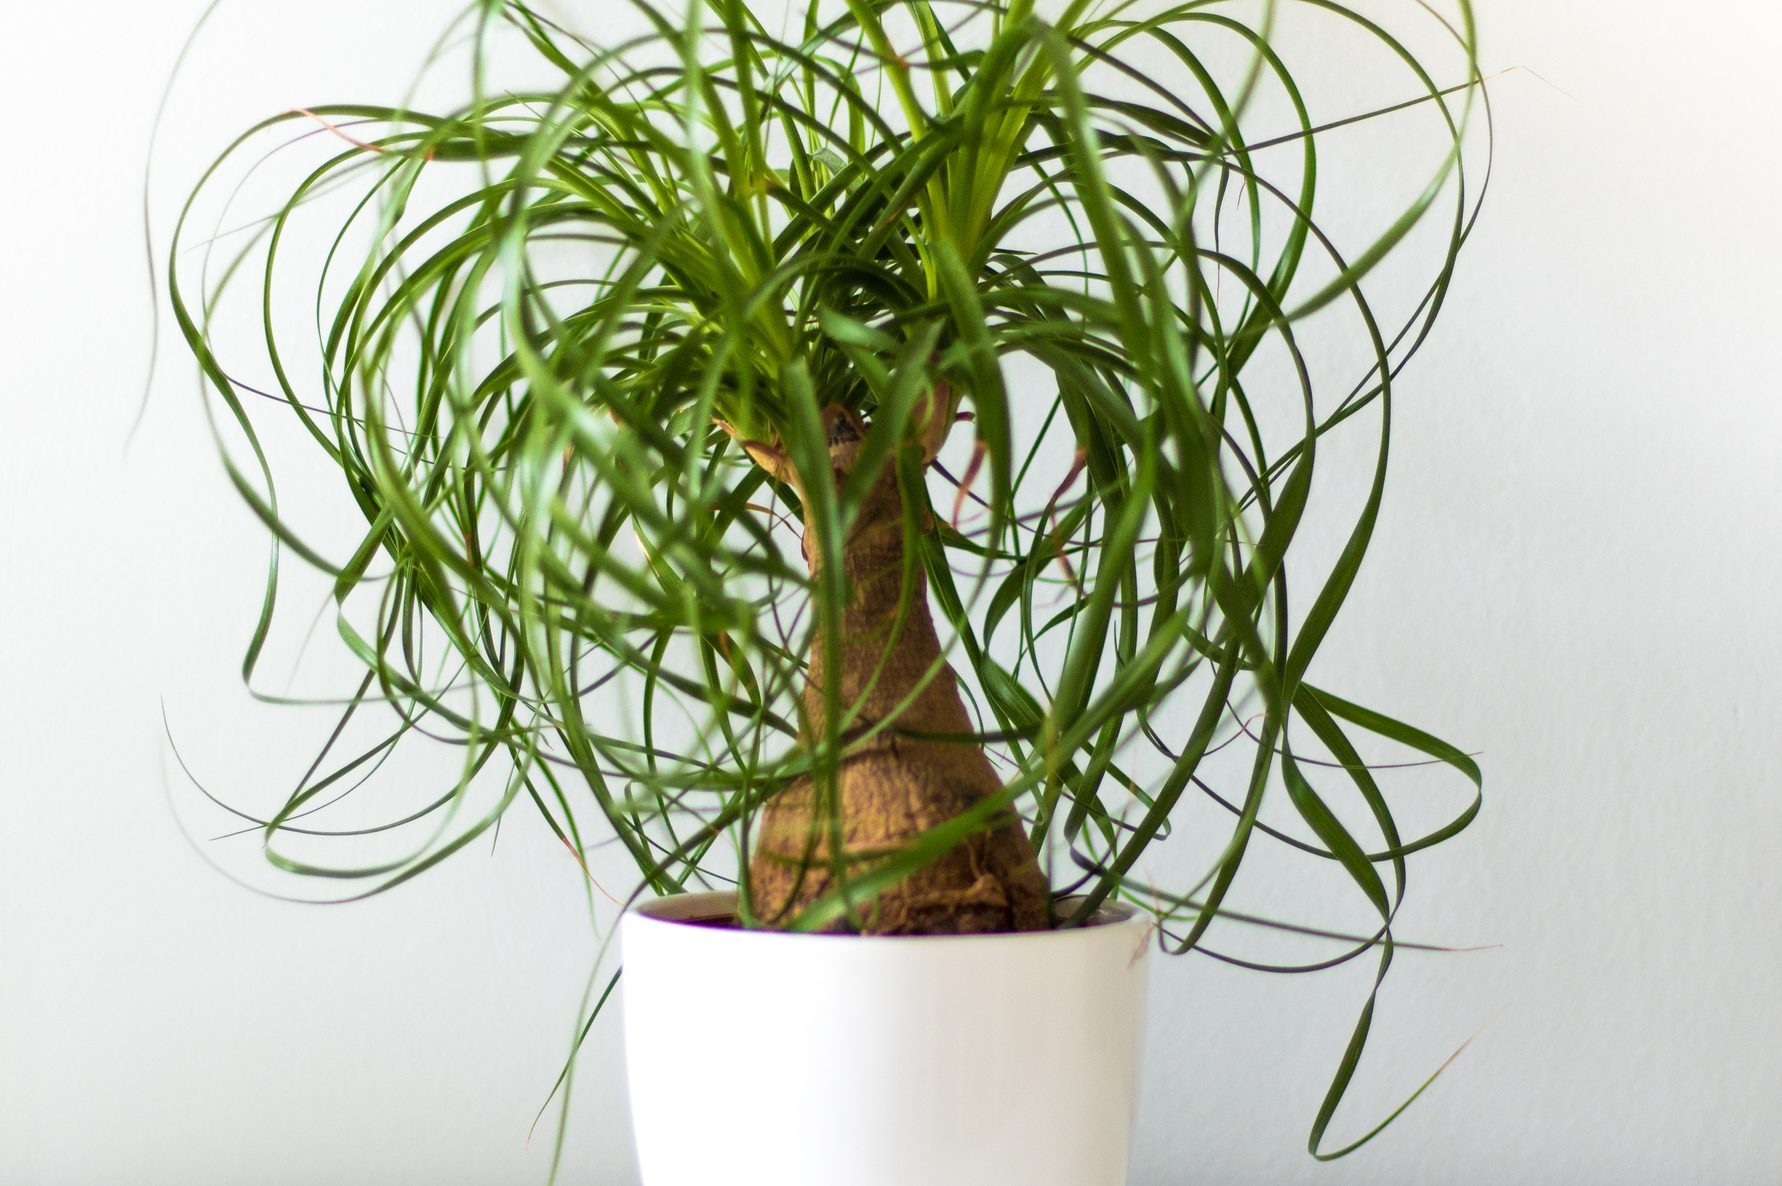 ponytail palm in a white pot